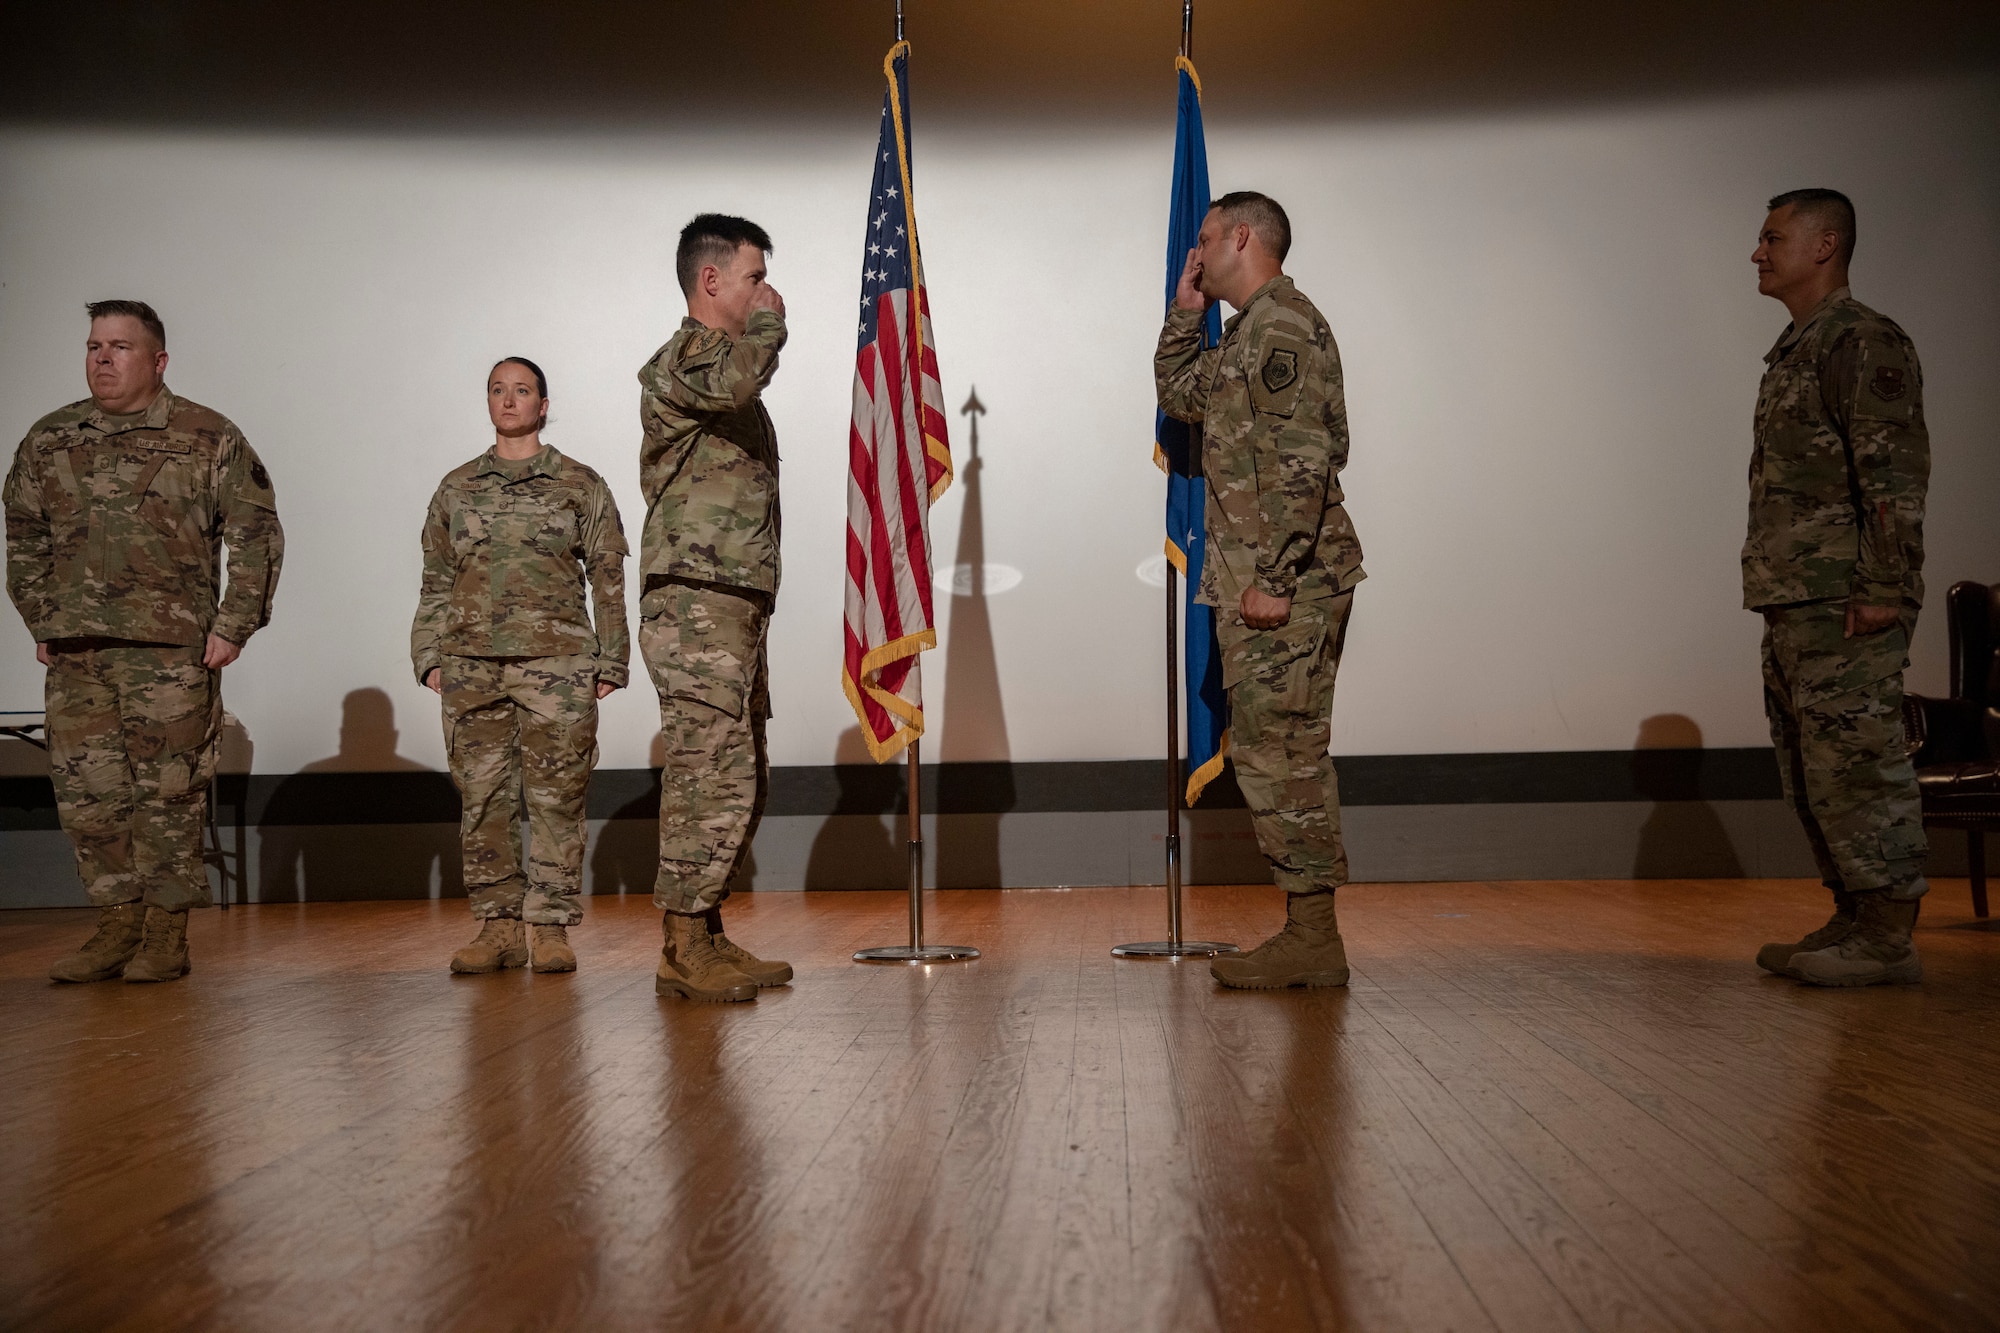 U.S. Air Force Col. Thomas Coakley, 17th TRG commander, solutes  Lt Col. John Bergmans at the base theater, on Goodfellow Air Force Base, Texas, June 17, 2020.  The change of command ceremony is a time honored military tradition that signifies the orderly transfer of authority. (Courtesy photo)